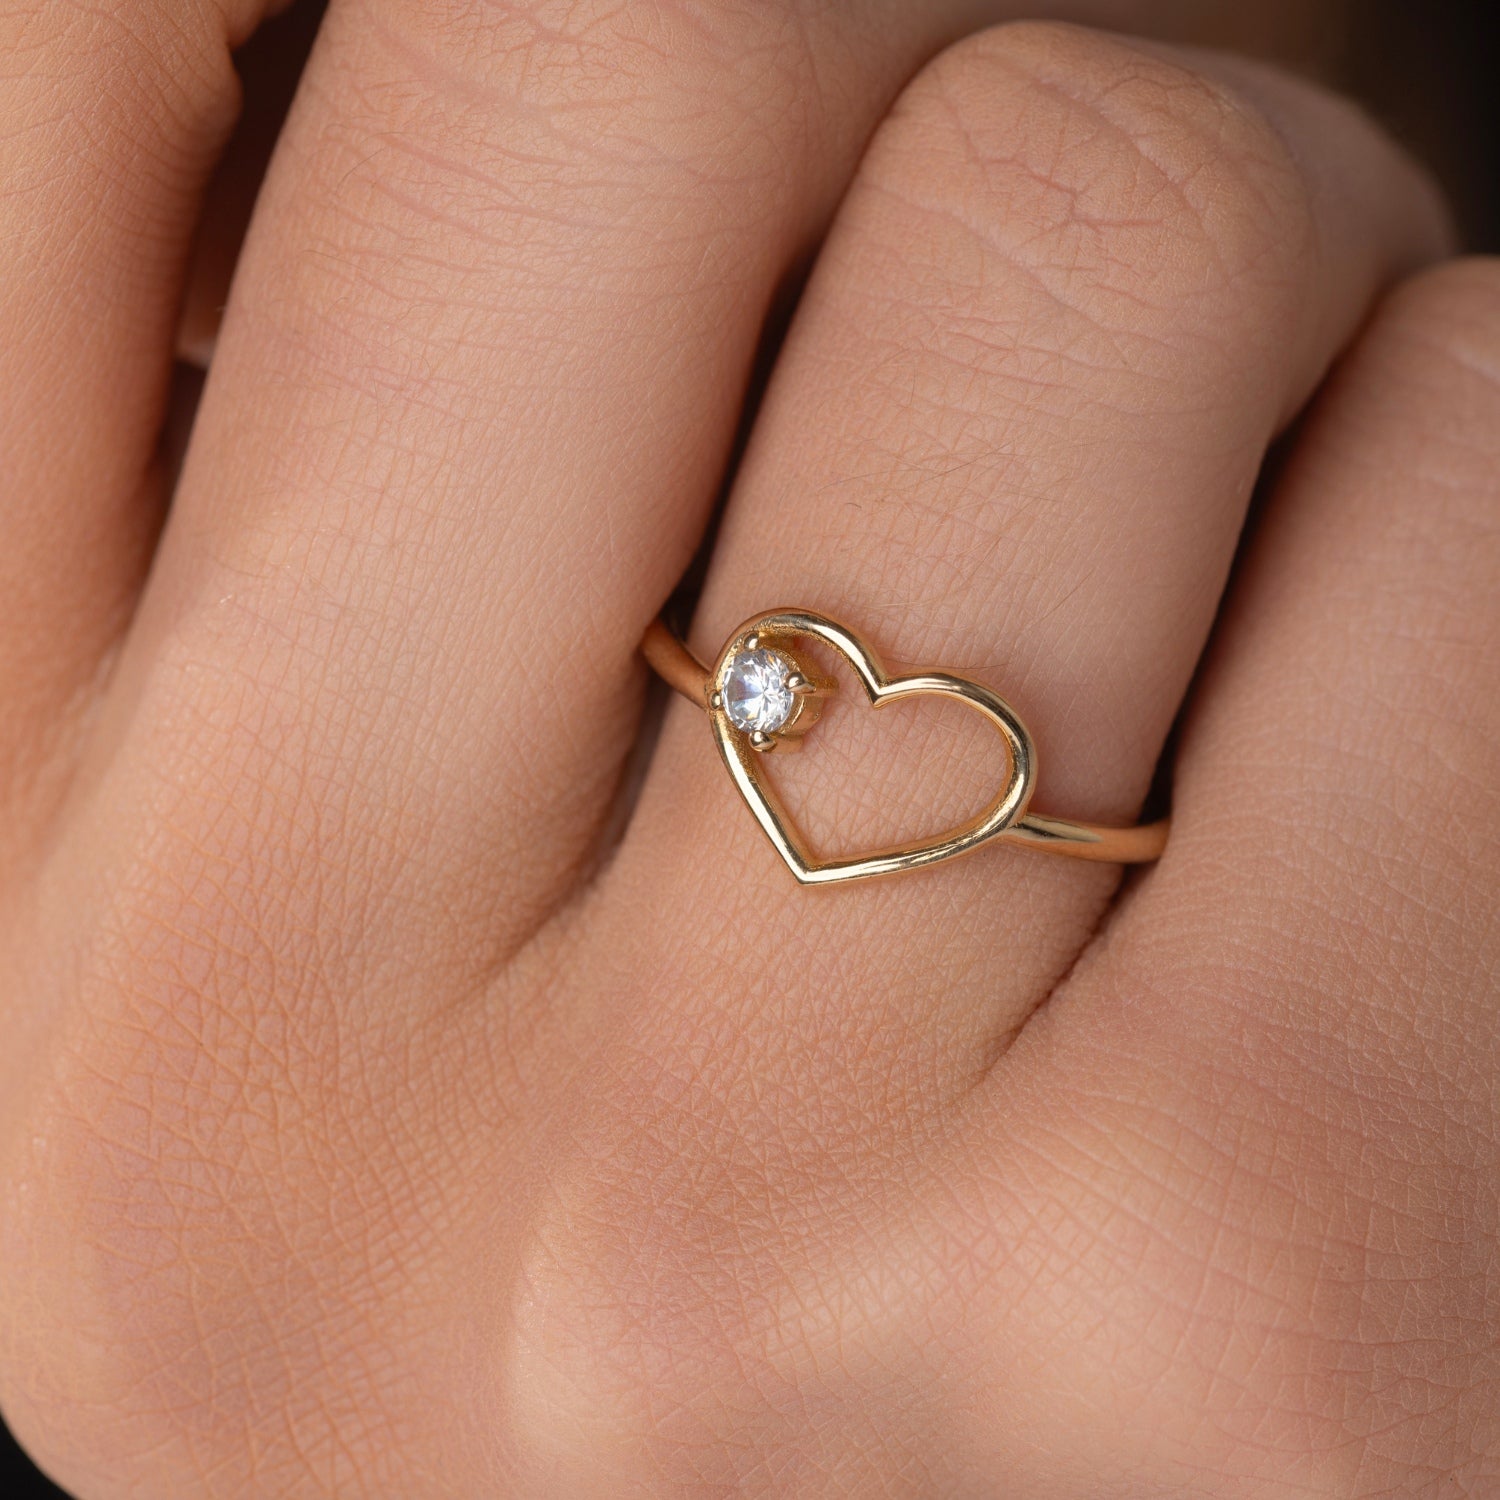 Heart Shaped Ring with Diamond